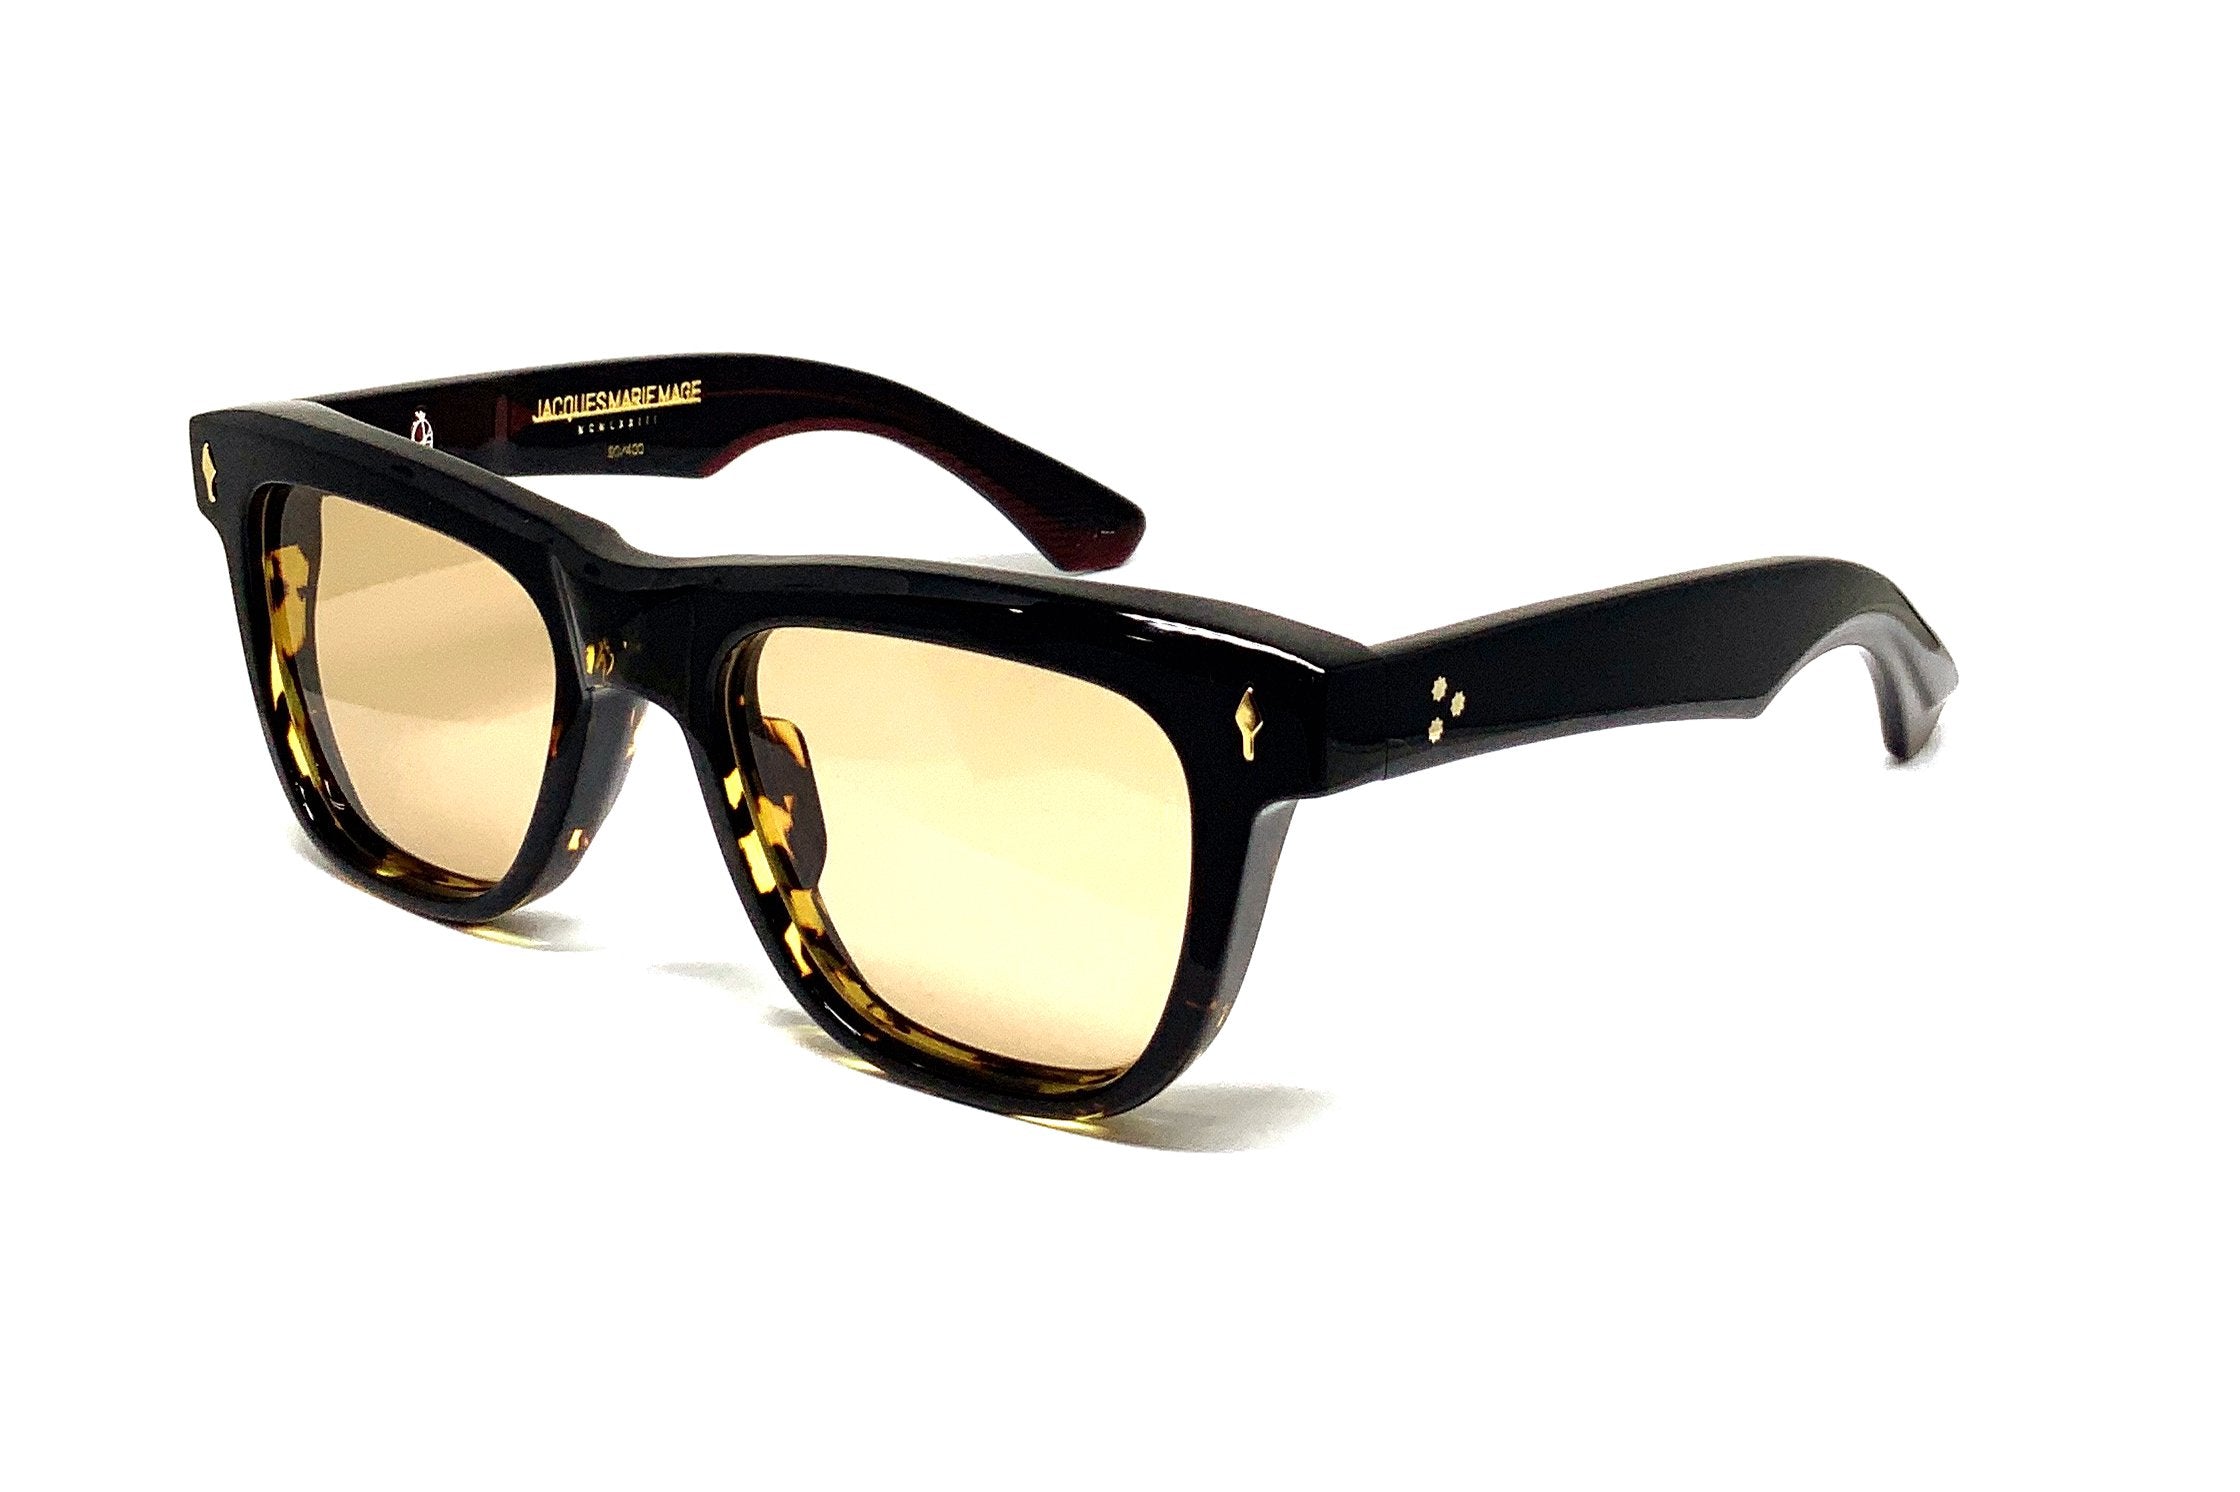 Three quarter view of thick black sunglasses frame with yellow tinted lenses